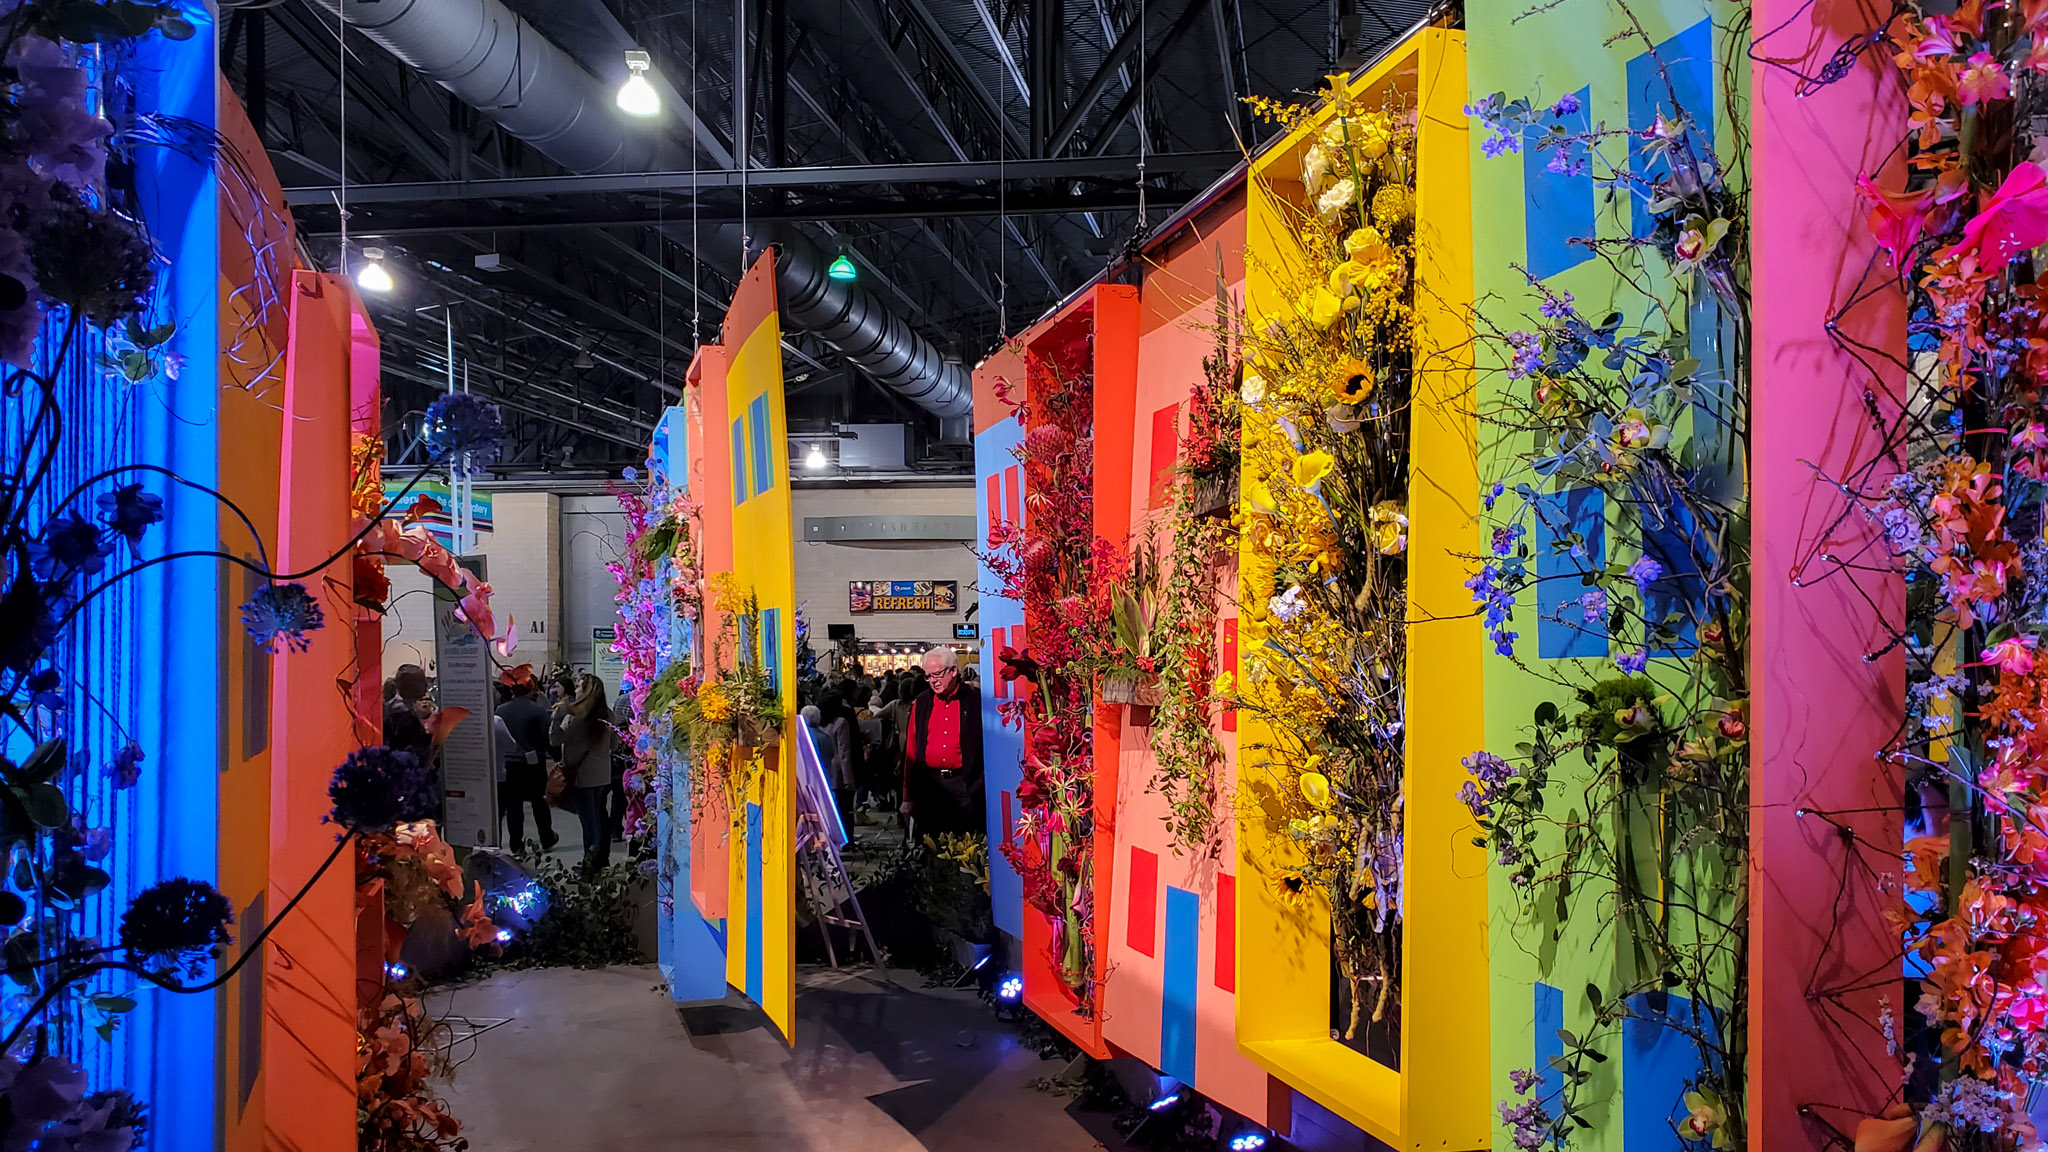 Le Strade delle Cinque Terre exhibit at the 2020 Philly Flower Show